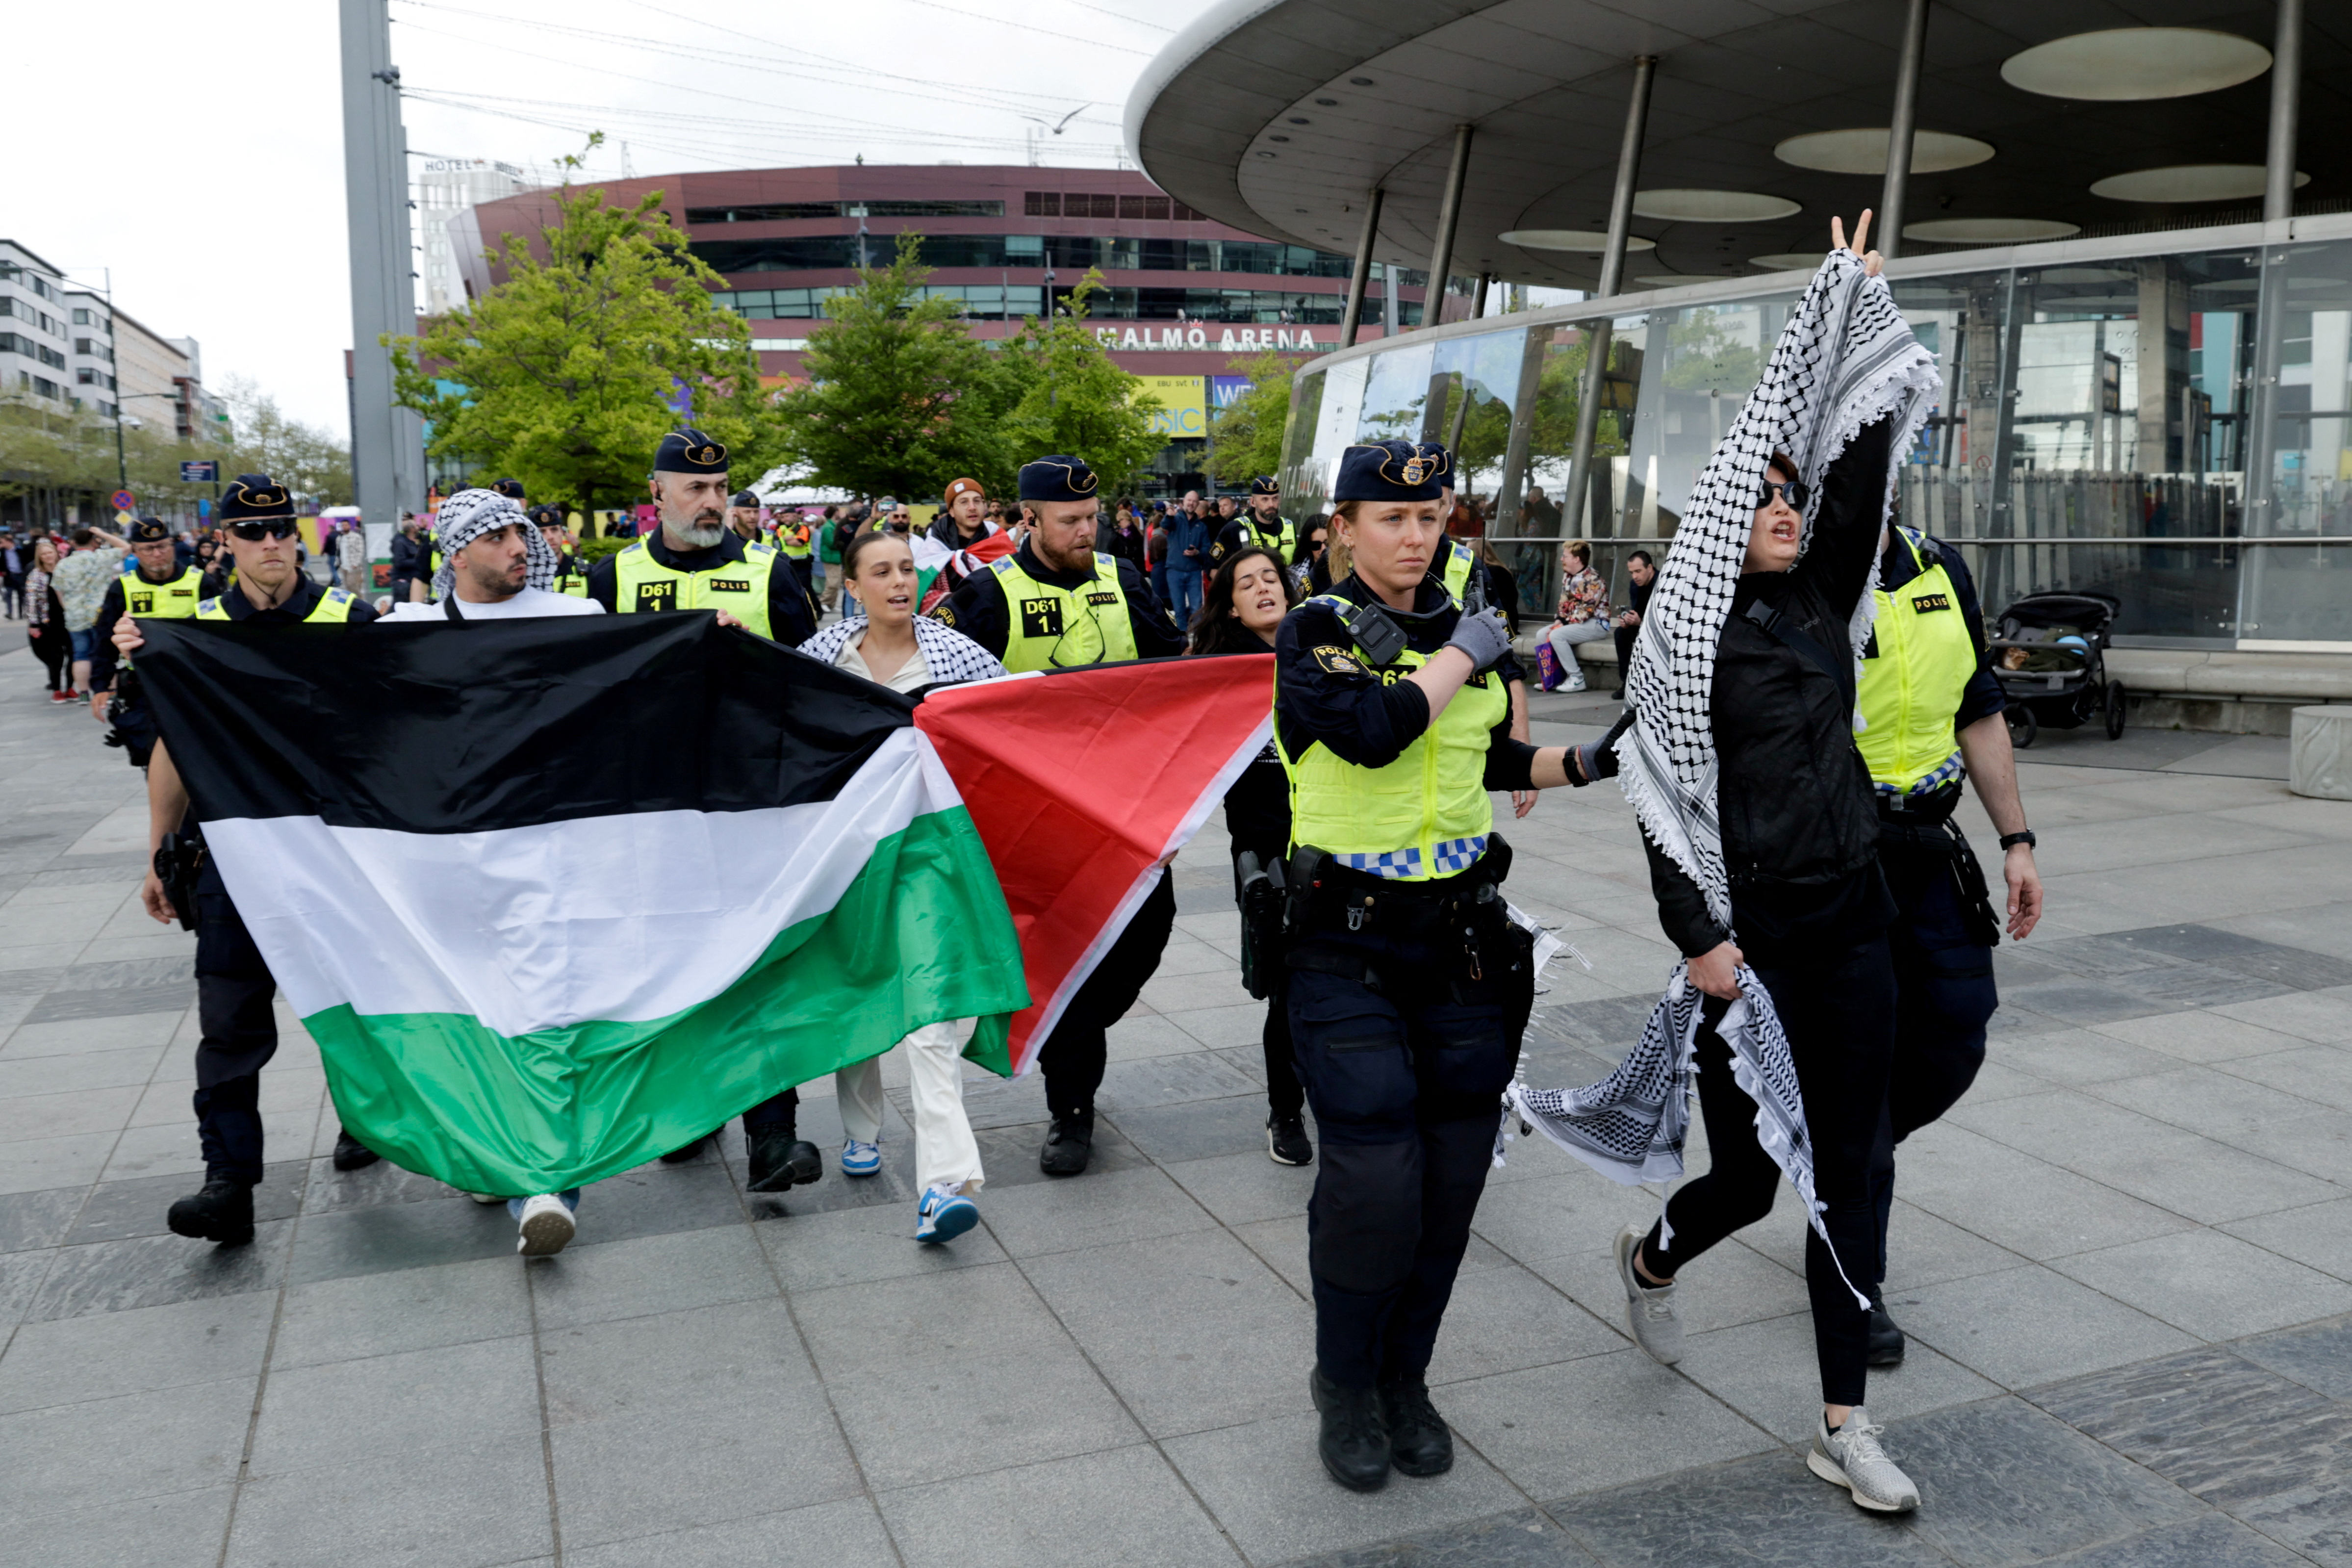 People protest against Israeli participation in the Eurovision Song Contest in Malmo